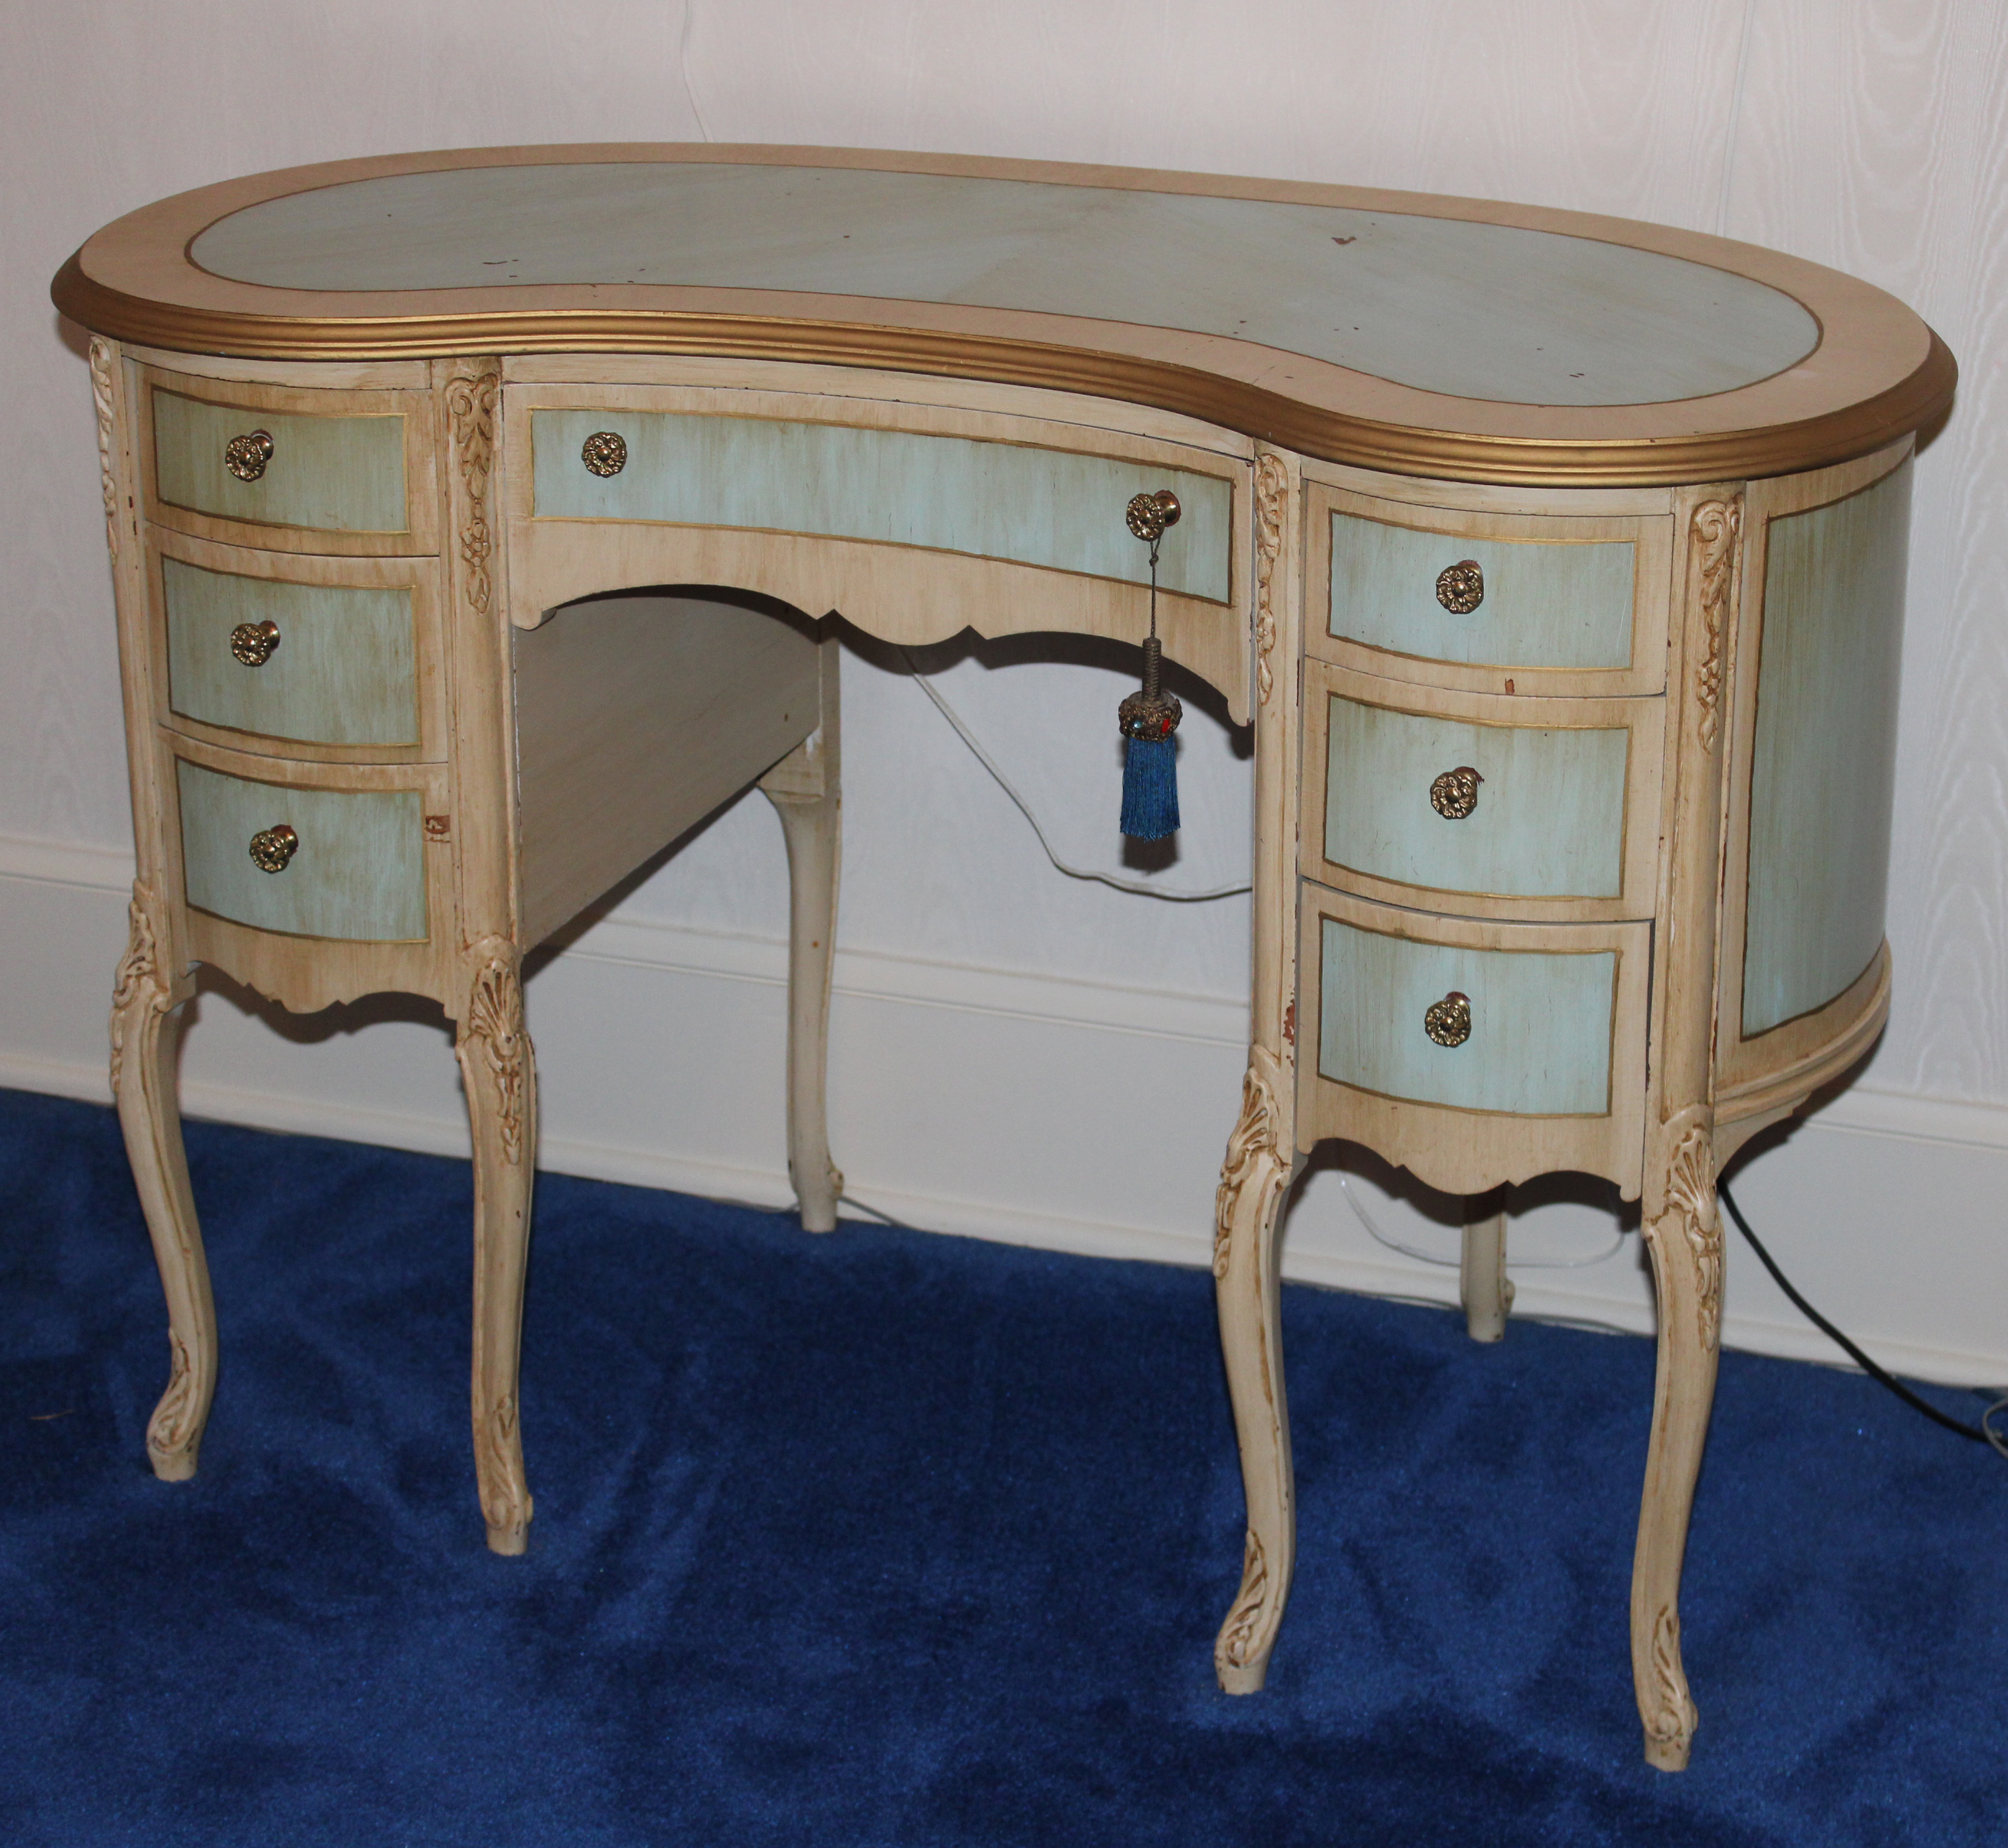 PAINTED FRENCH KIDNEY DESK PAINTED FRENCH